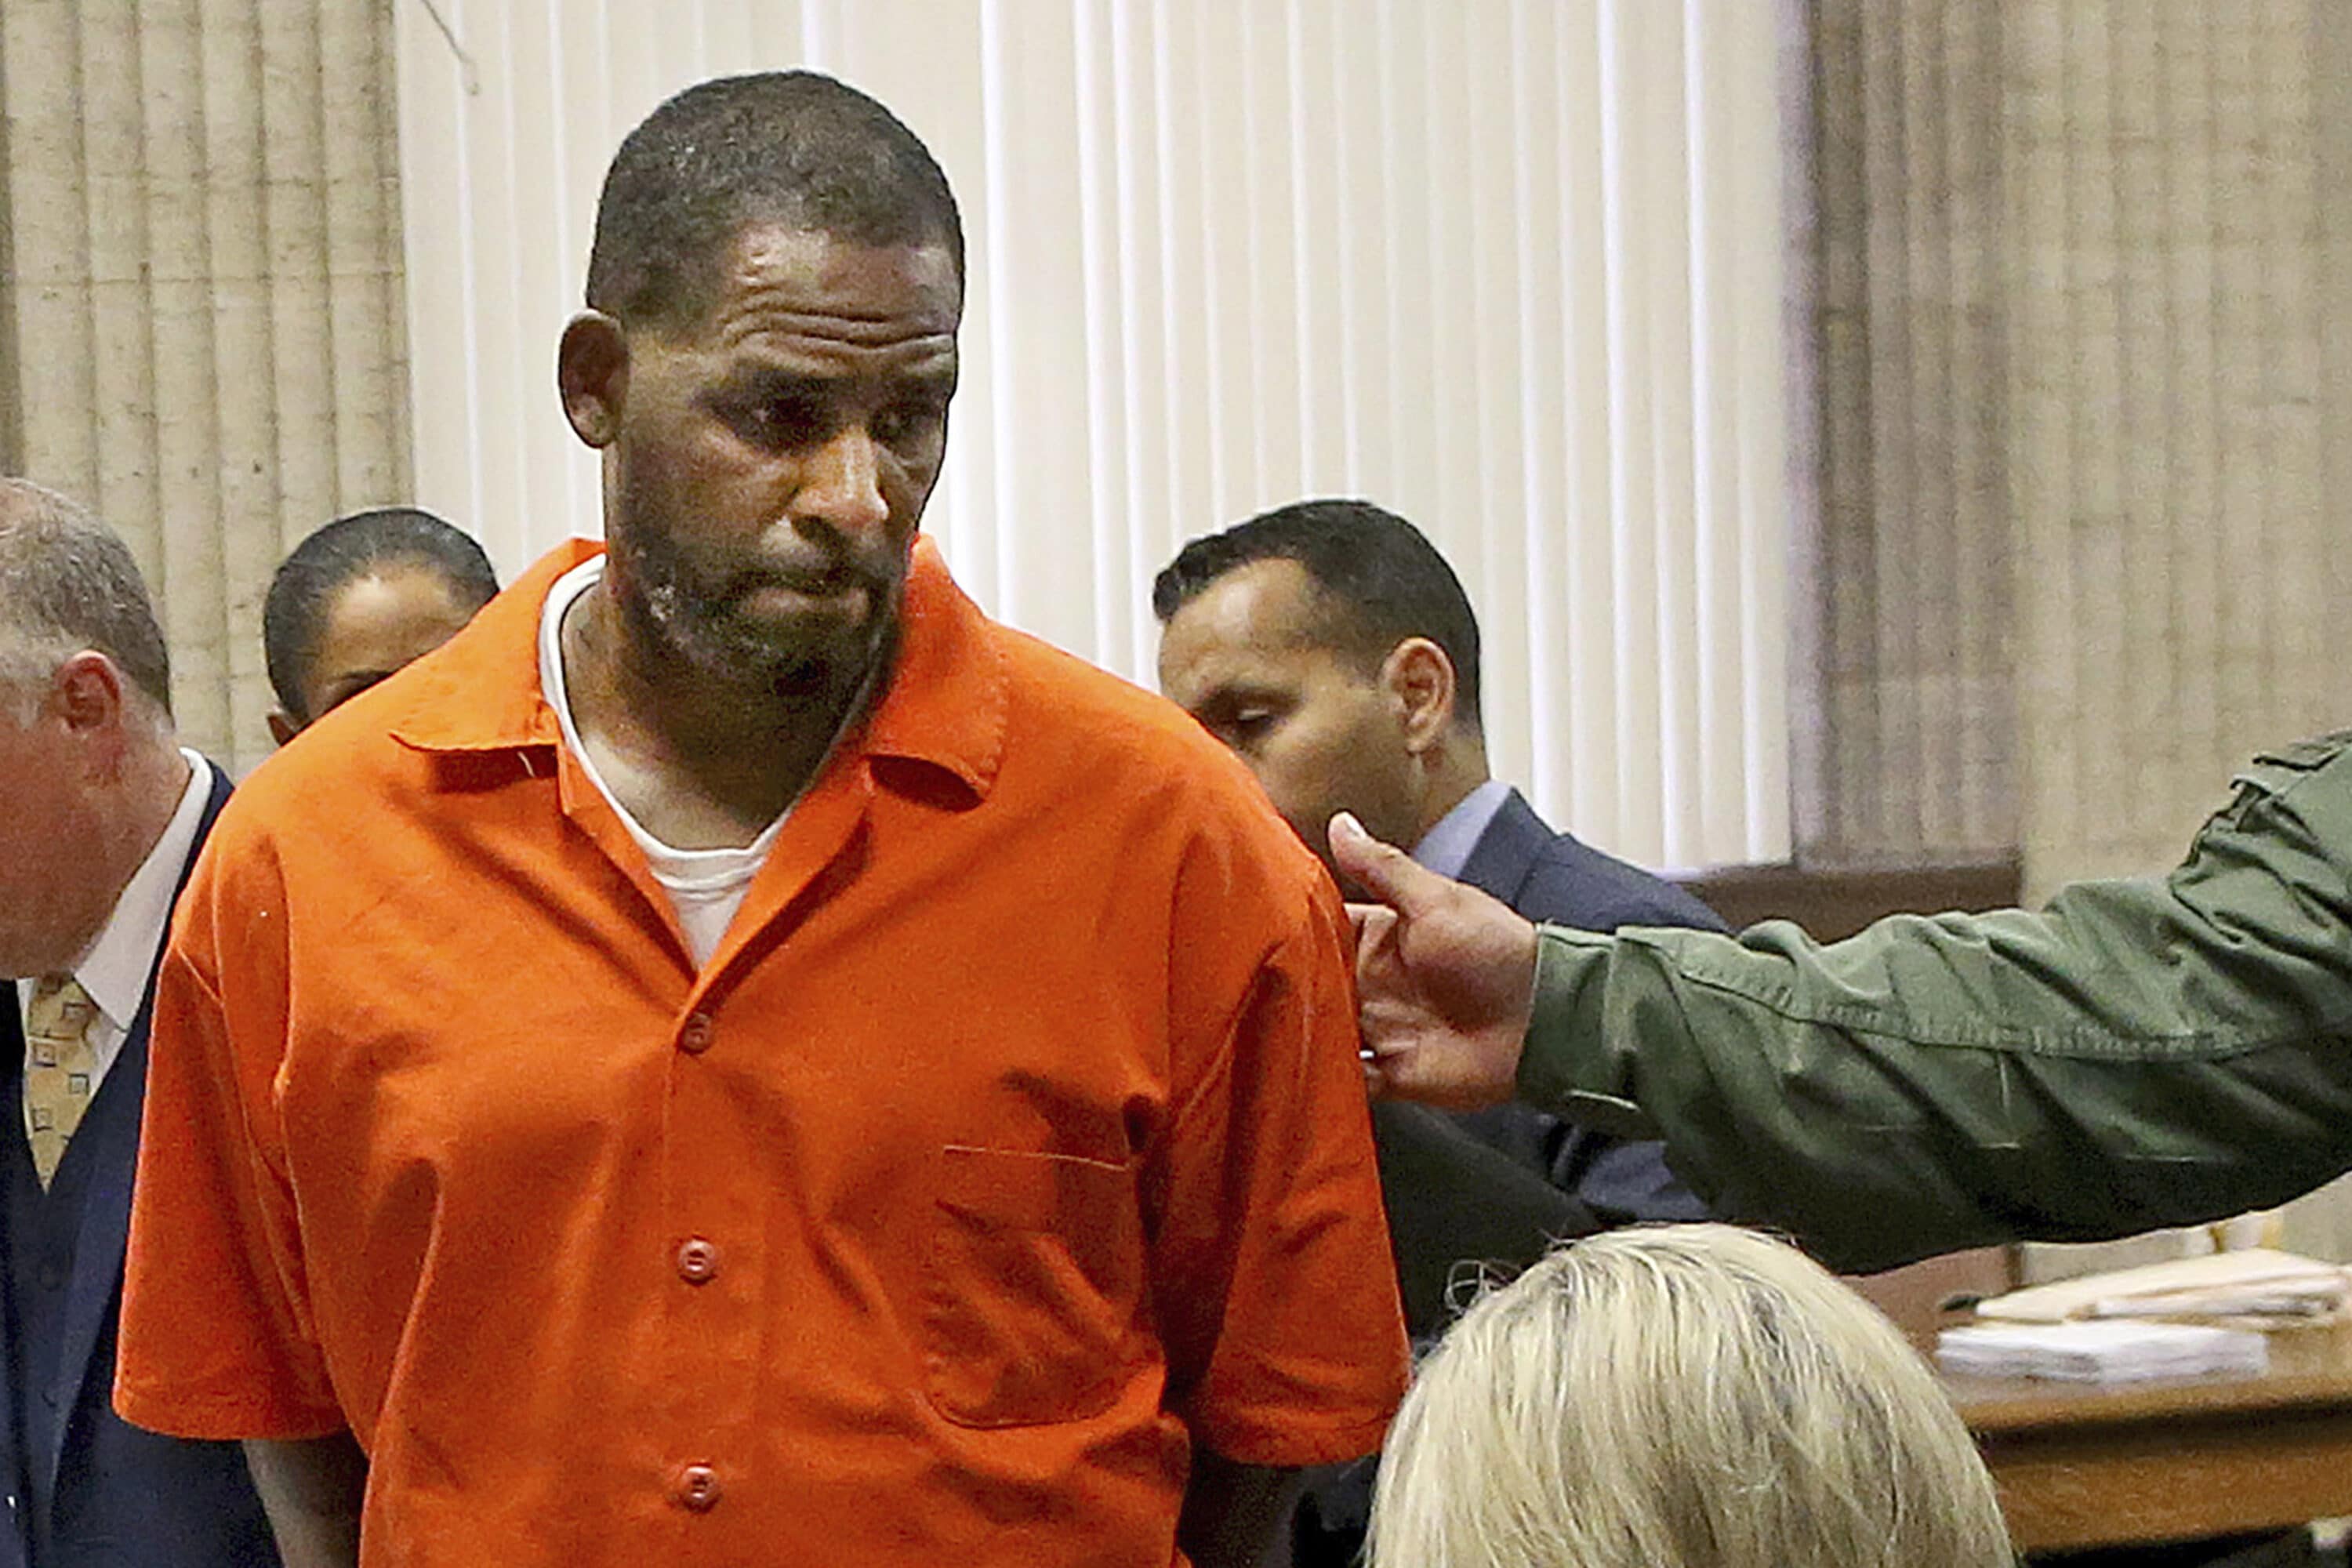 More Alleged R Kelly Victims Come Forward As Trial Enters Third Week Courthouse News Service